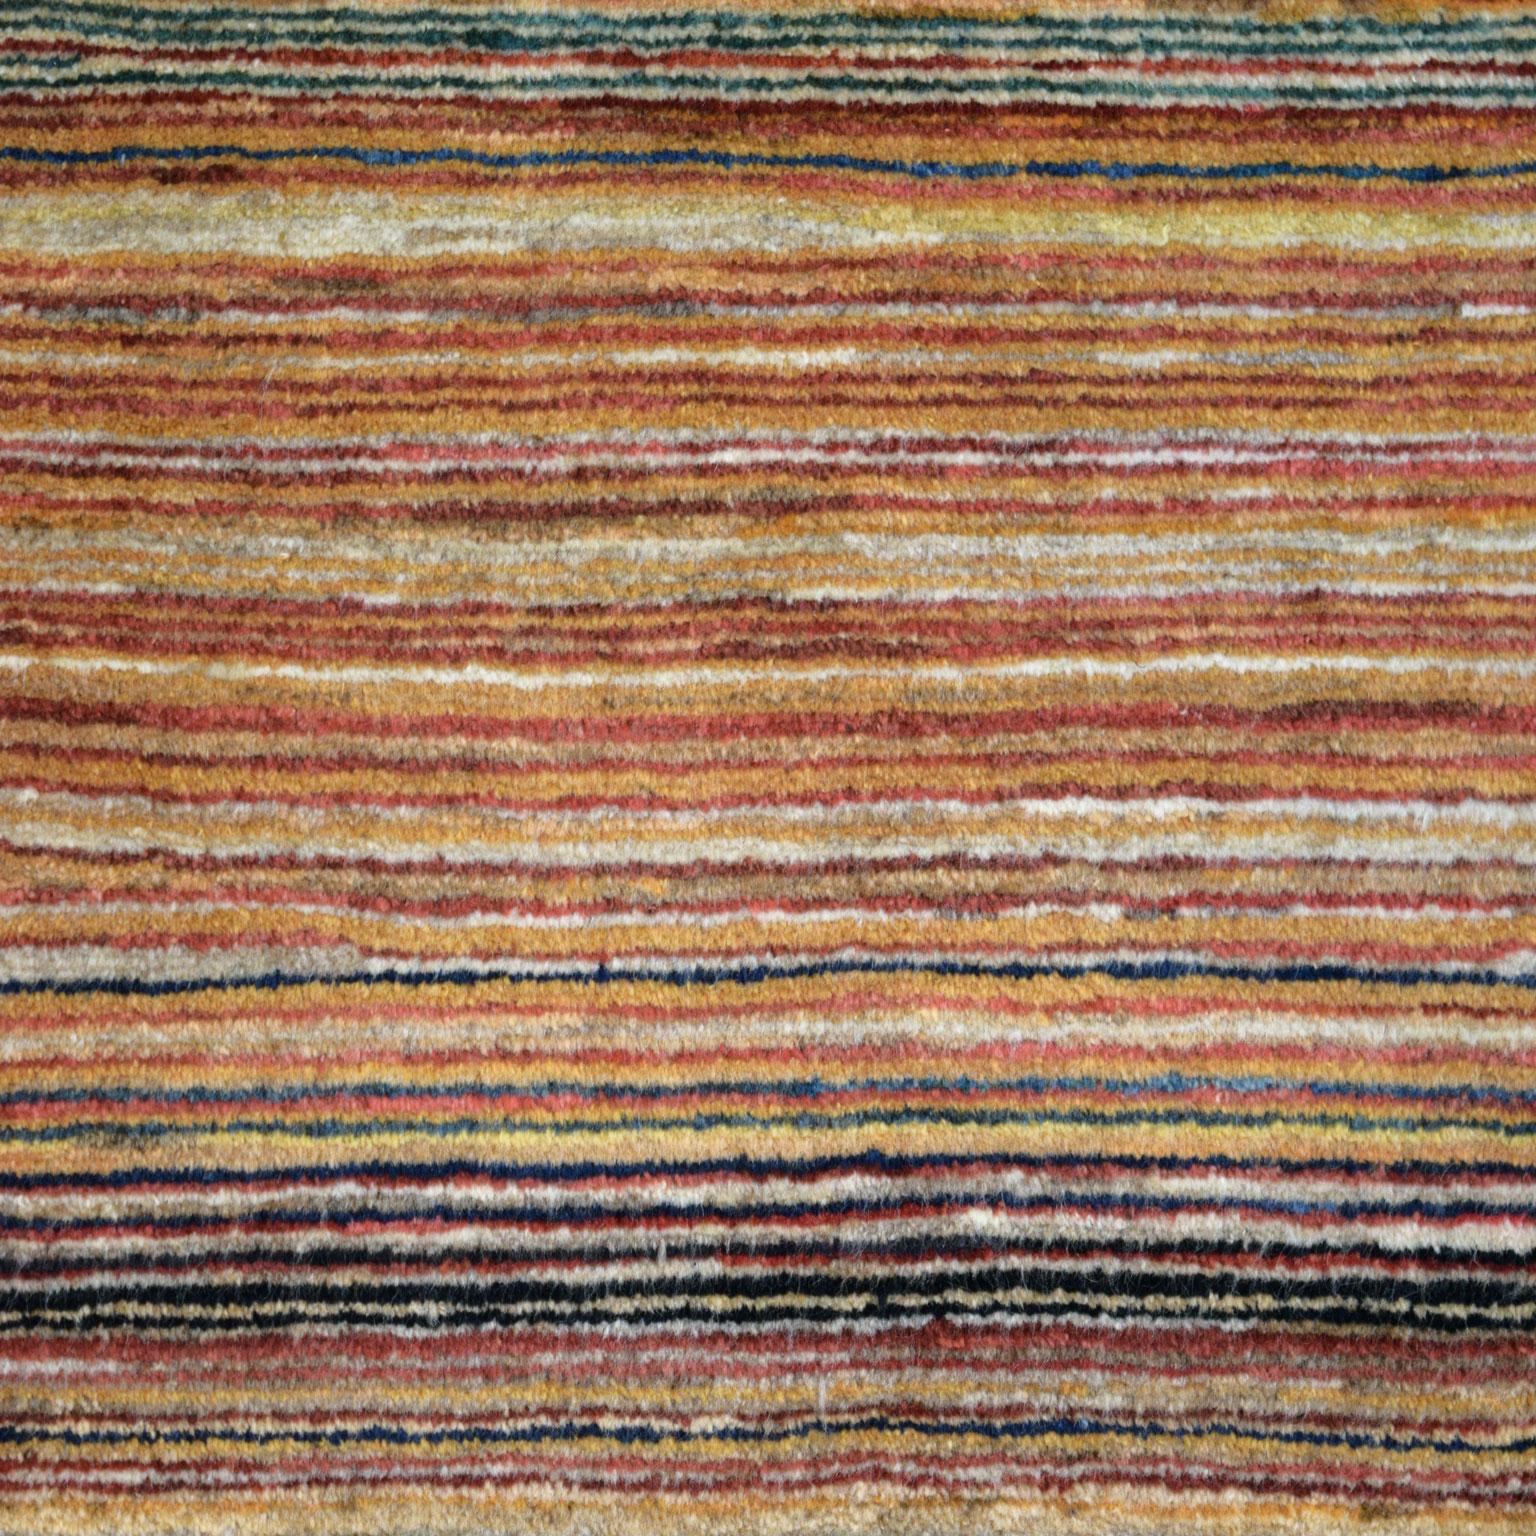 Measuring 3’5” x 3’10”, this colorful Persian wool area rug with a striped design is hand-knotted and belongs to Orley Shabahang’s World Market Collection. During the weaving process, the artisan utilized traditional Persian weaving techniques.